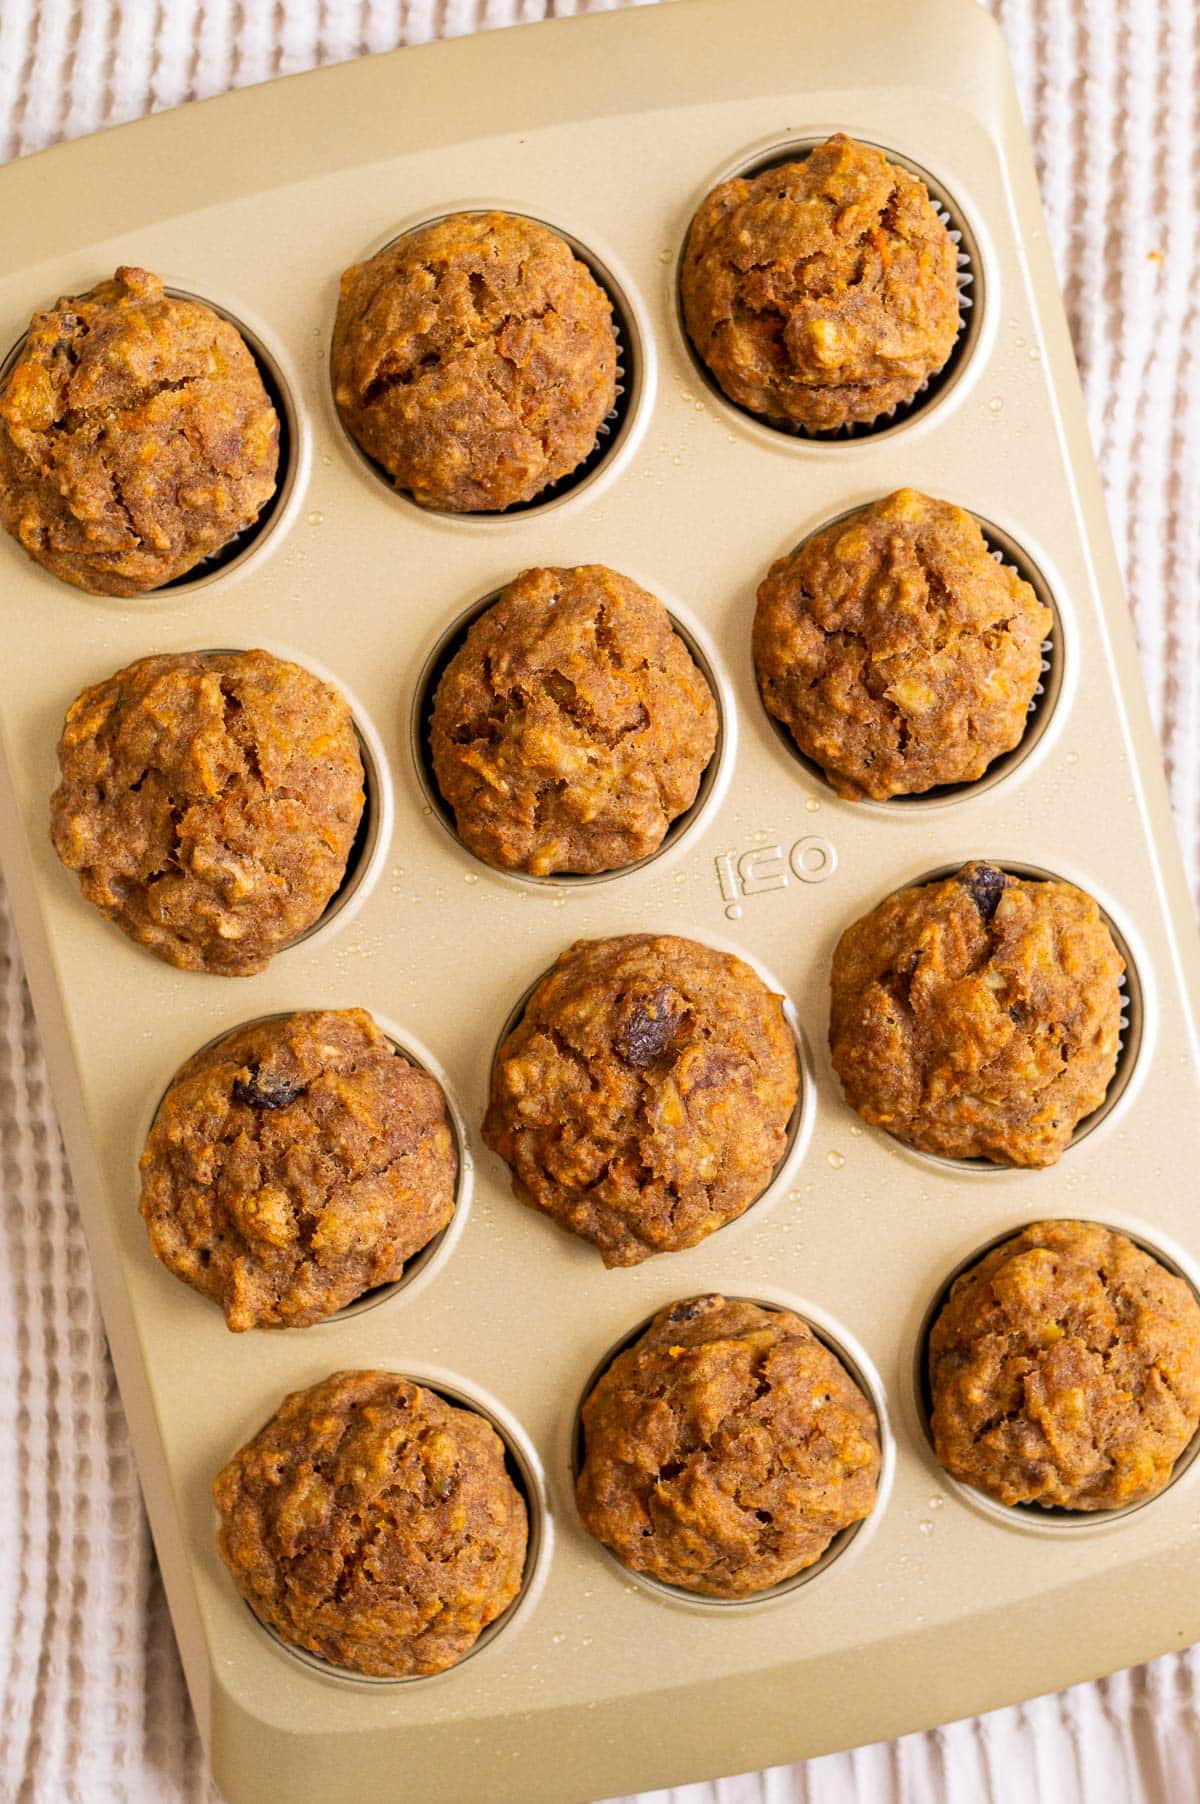 Top view of carrot banana muffins in a gold baking muffin tin.